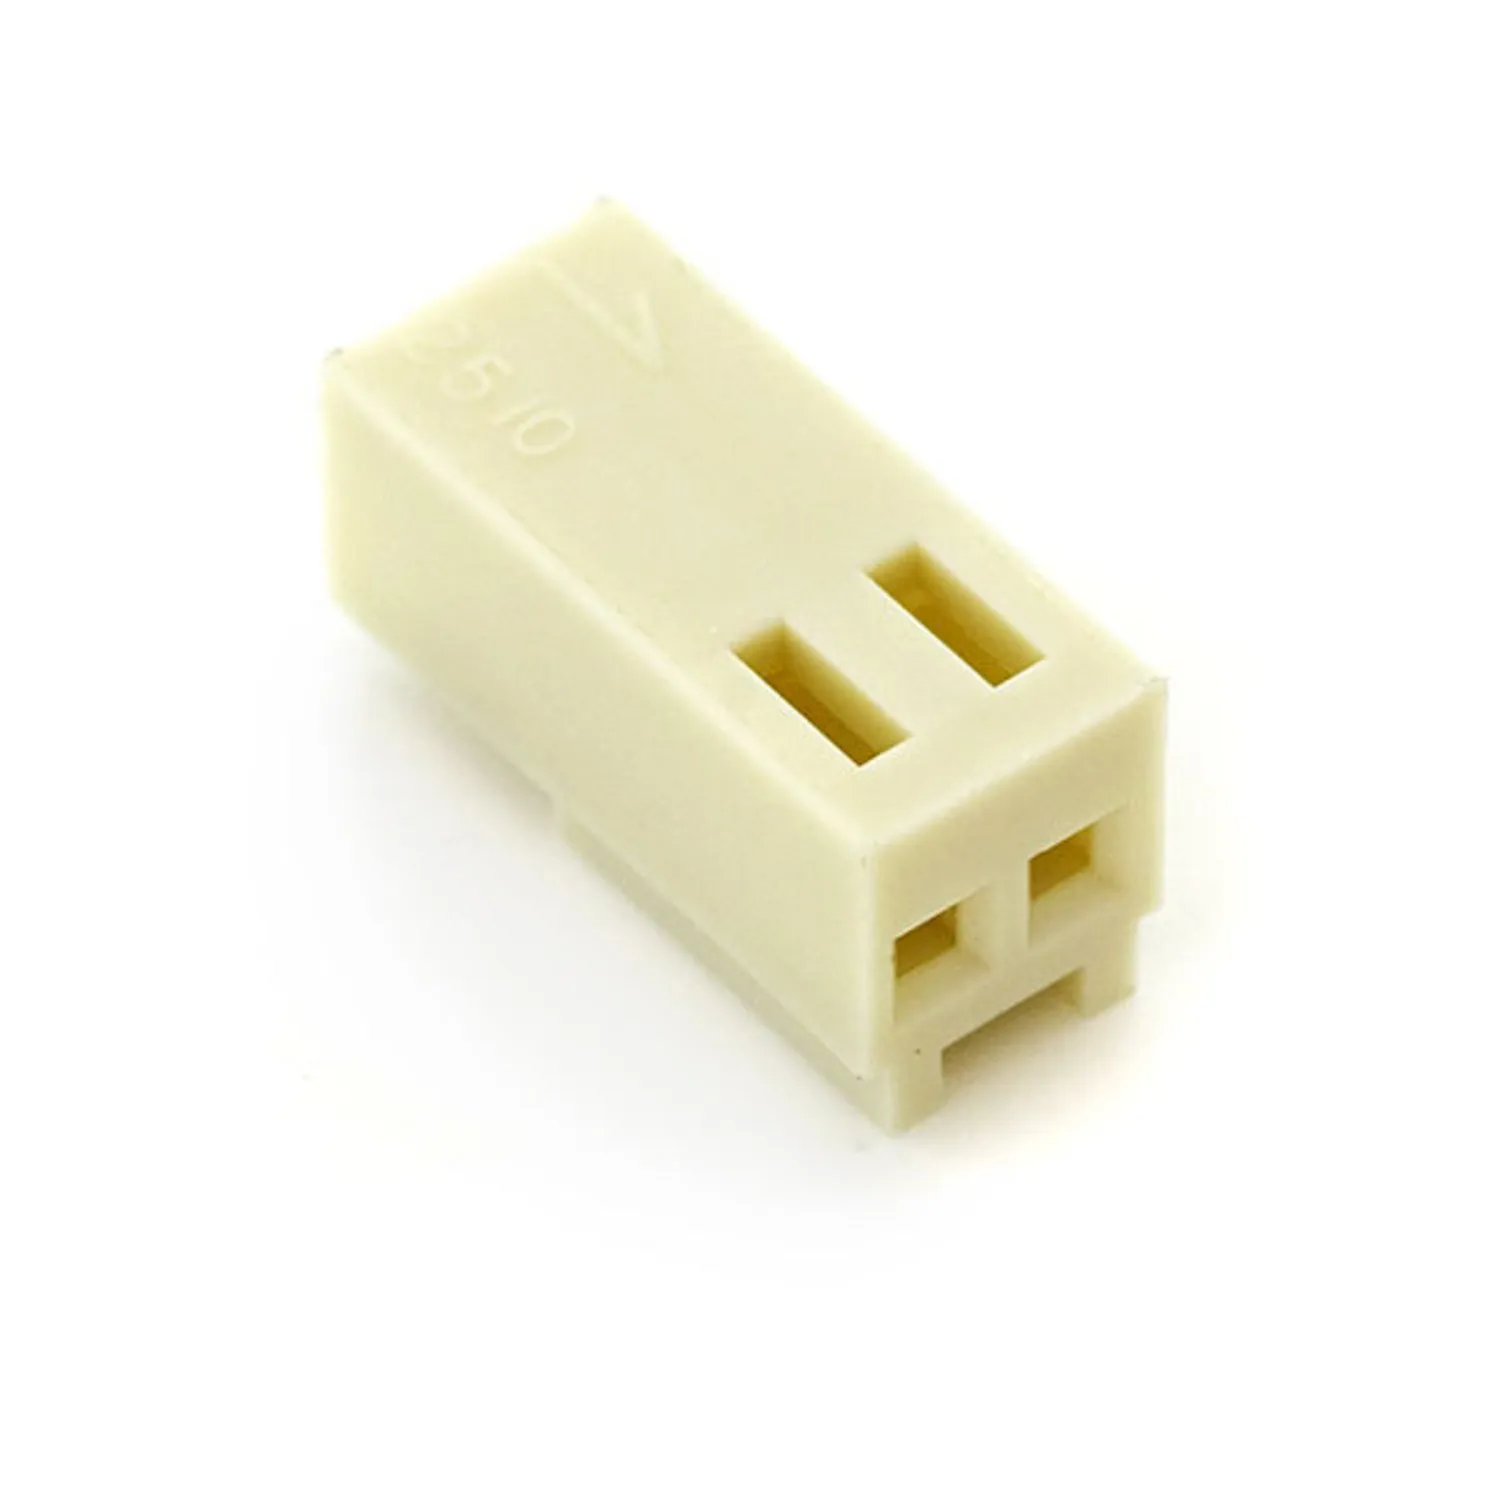 Photo of Polarized Connectors - Housing (2-Pin)